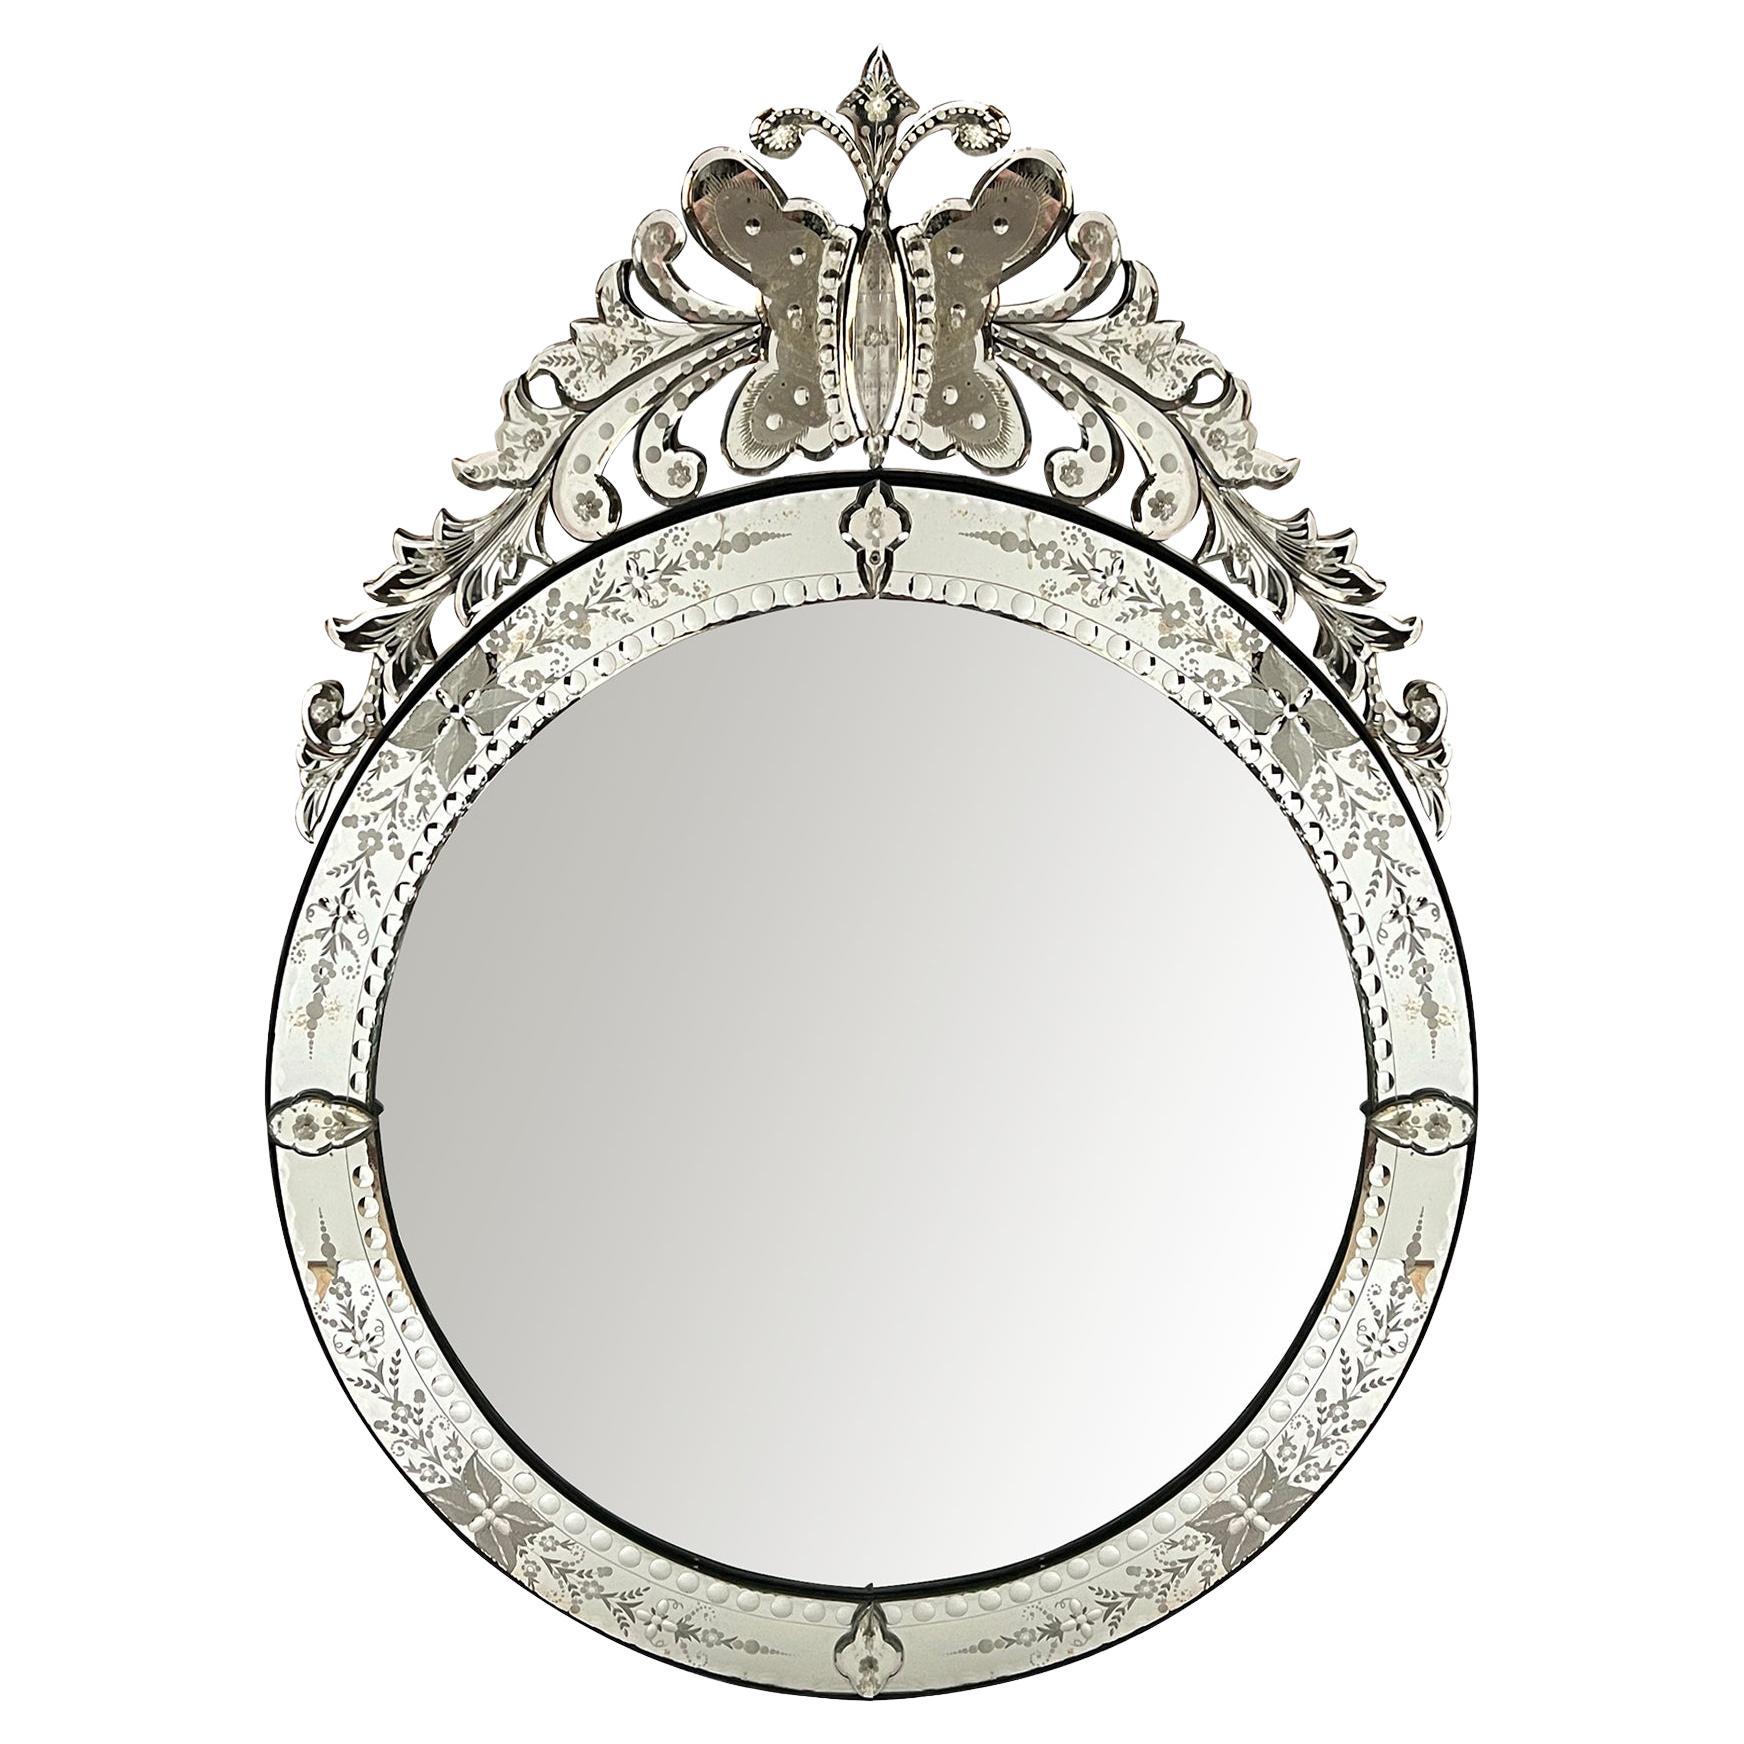 A Custom Venetian Style Circular Mirror with Ornate Butterfly & Floral Crest  For Sale